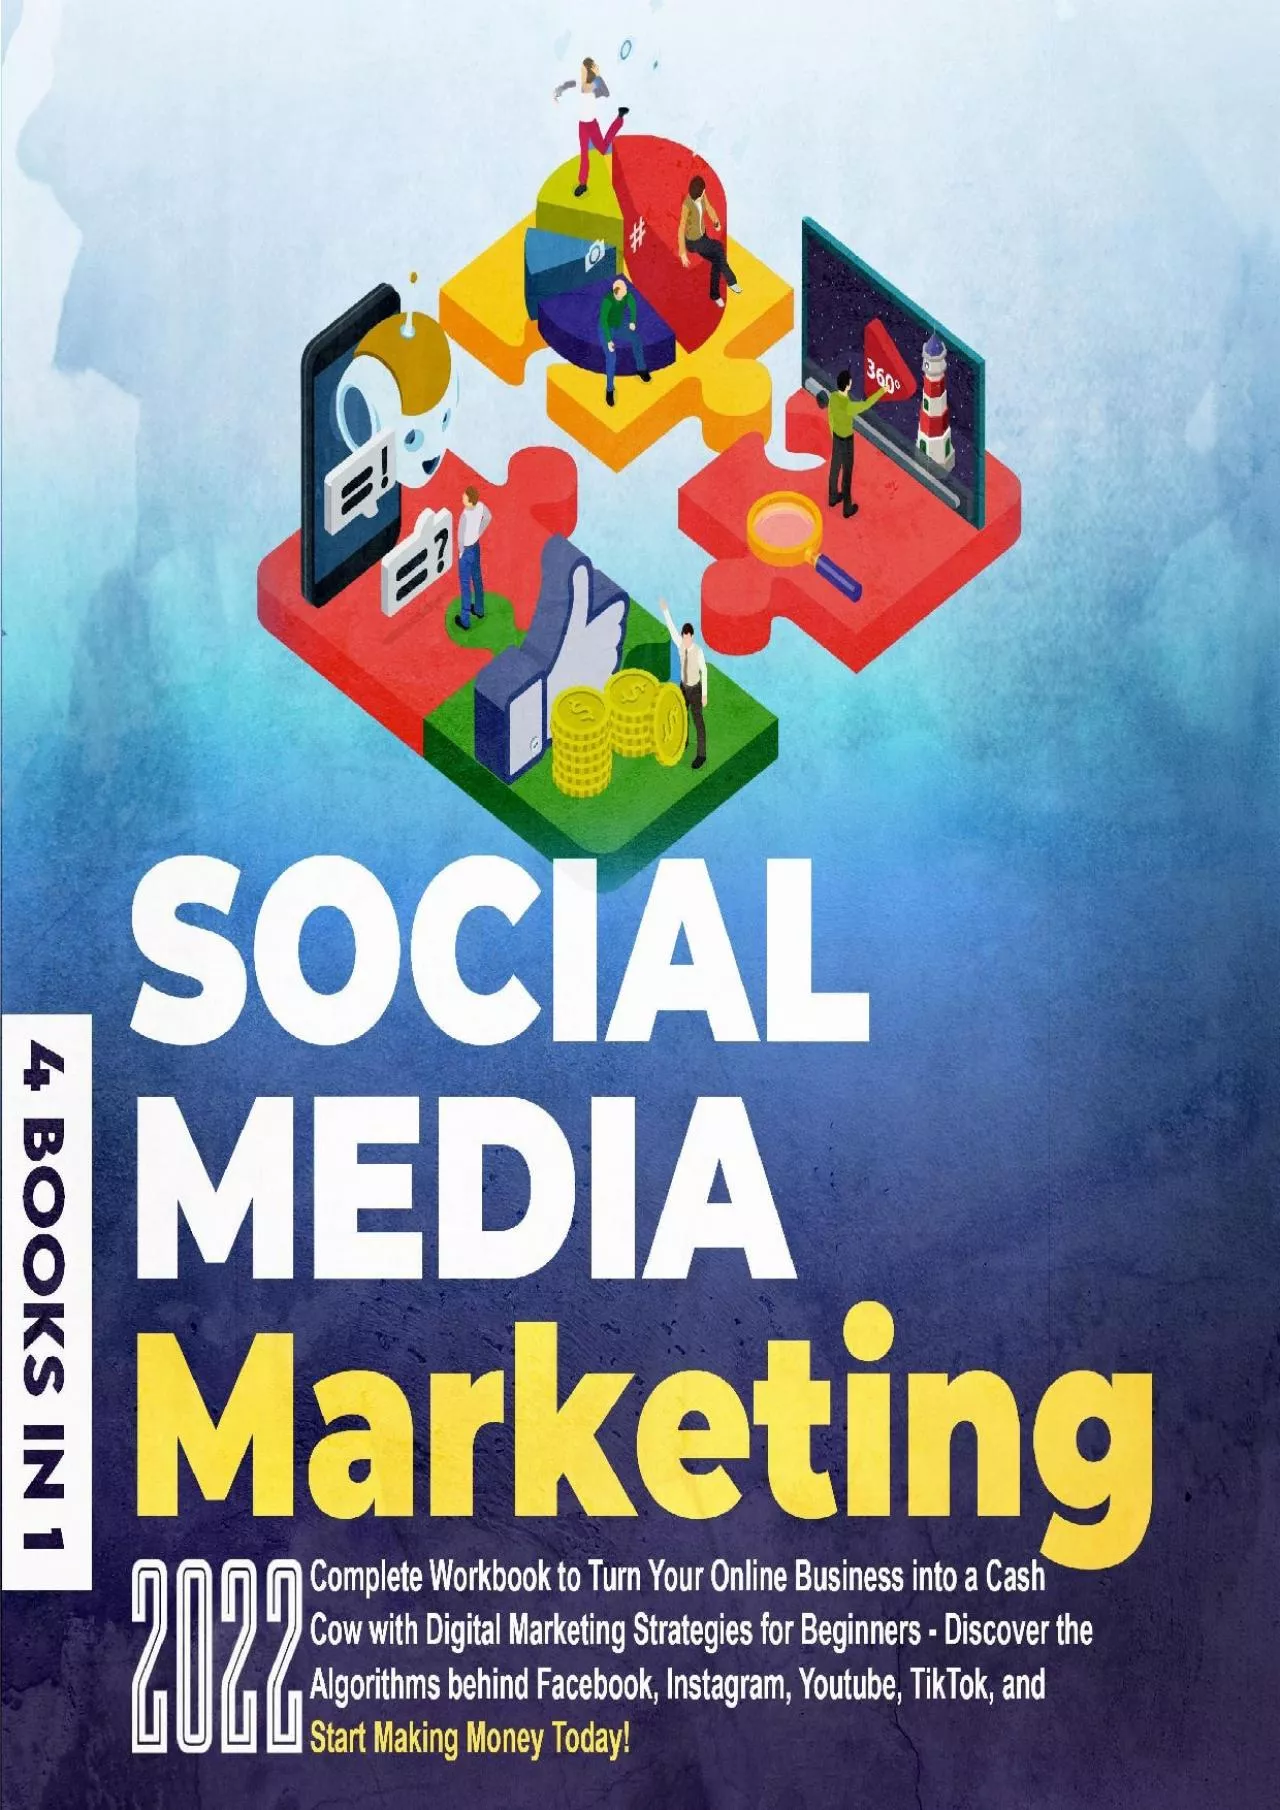 Social Media Marketing 2022 - 4 Books in 1: Complete Workbook to Turn Your Online Business